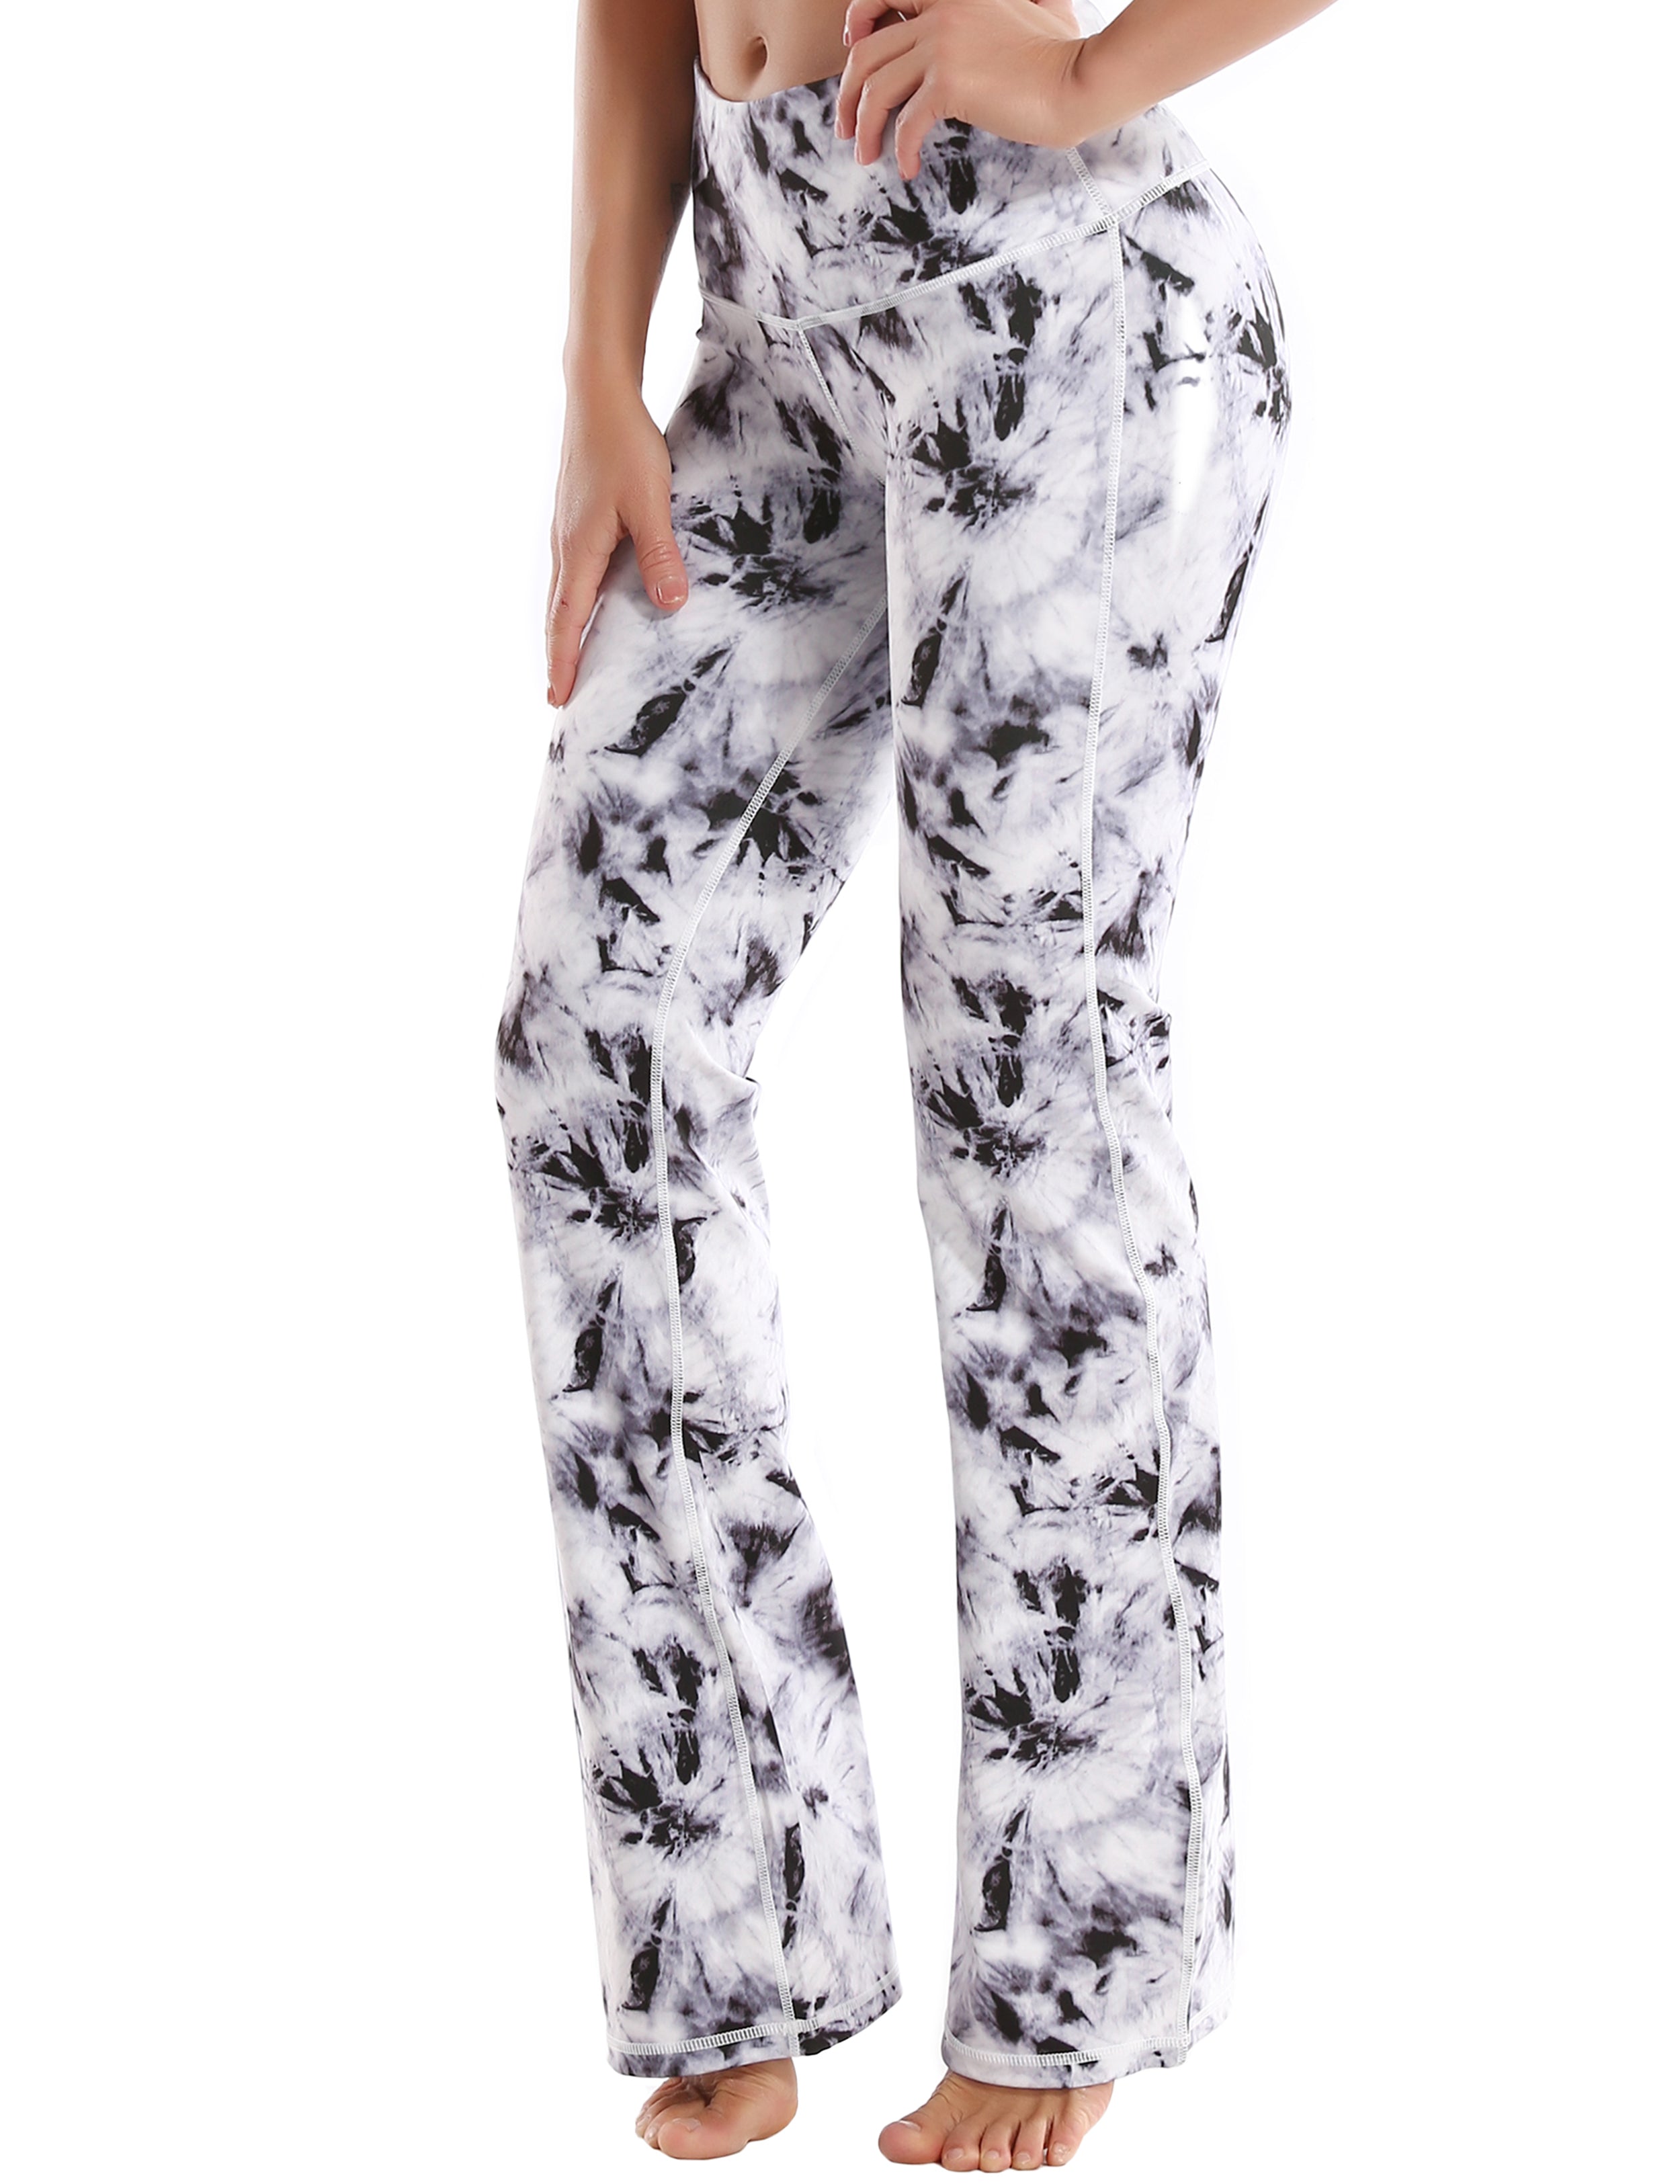 High Waist Printed Bootcut Leggings Black Dandelion 78%Polyester/22%Spandex Fabric doesn't attract lint easily 4-way stretch No see-through Moisture-wicking Tummy control Inner pocket Five lengths